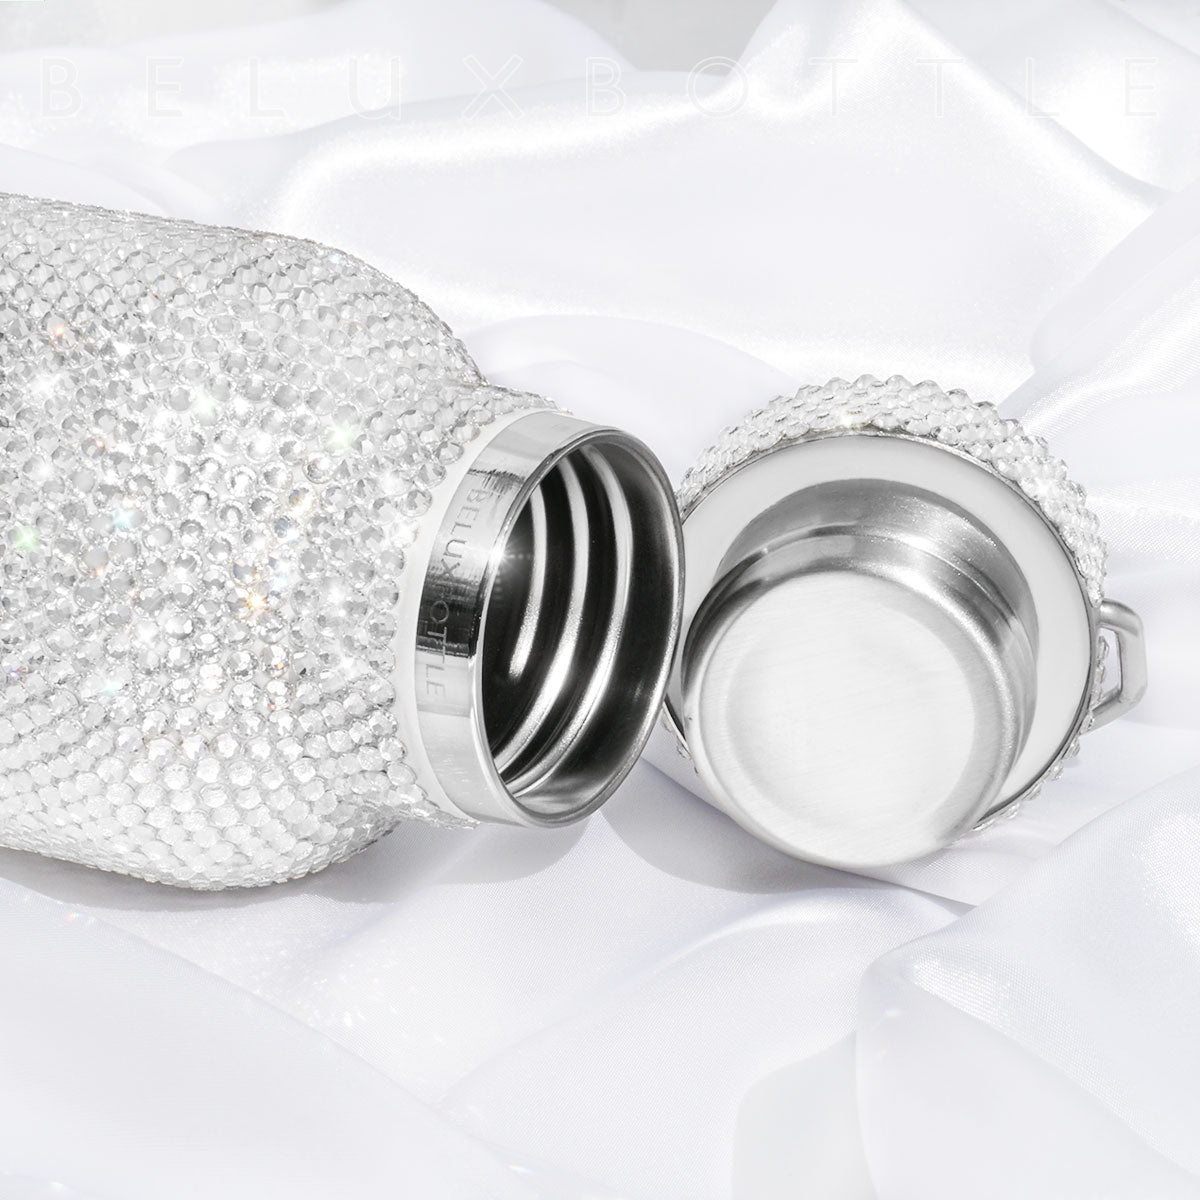 Close-up of Silver Diamond Drink Bottle Neck with Stainless Steel Blinged-Out Bottle Cap